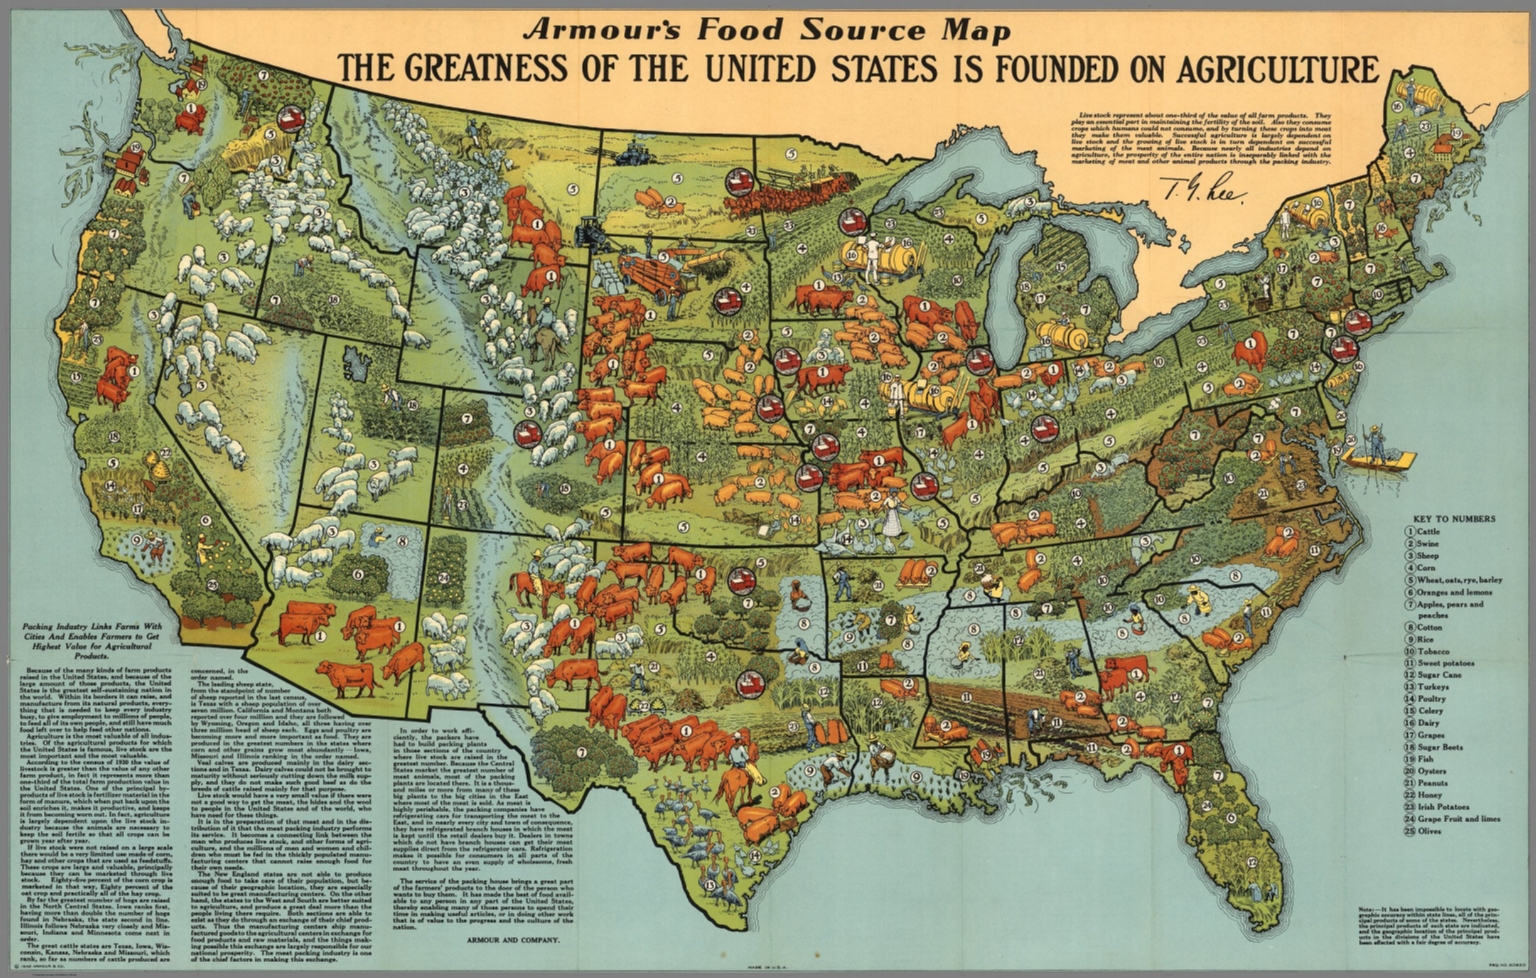 Armour Food Source Map. - David Rumsey Historical Map Collection